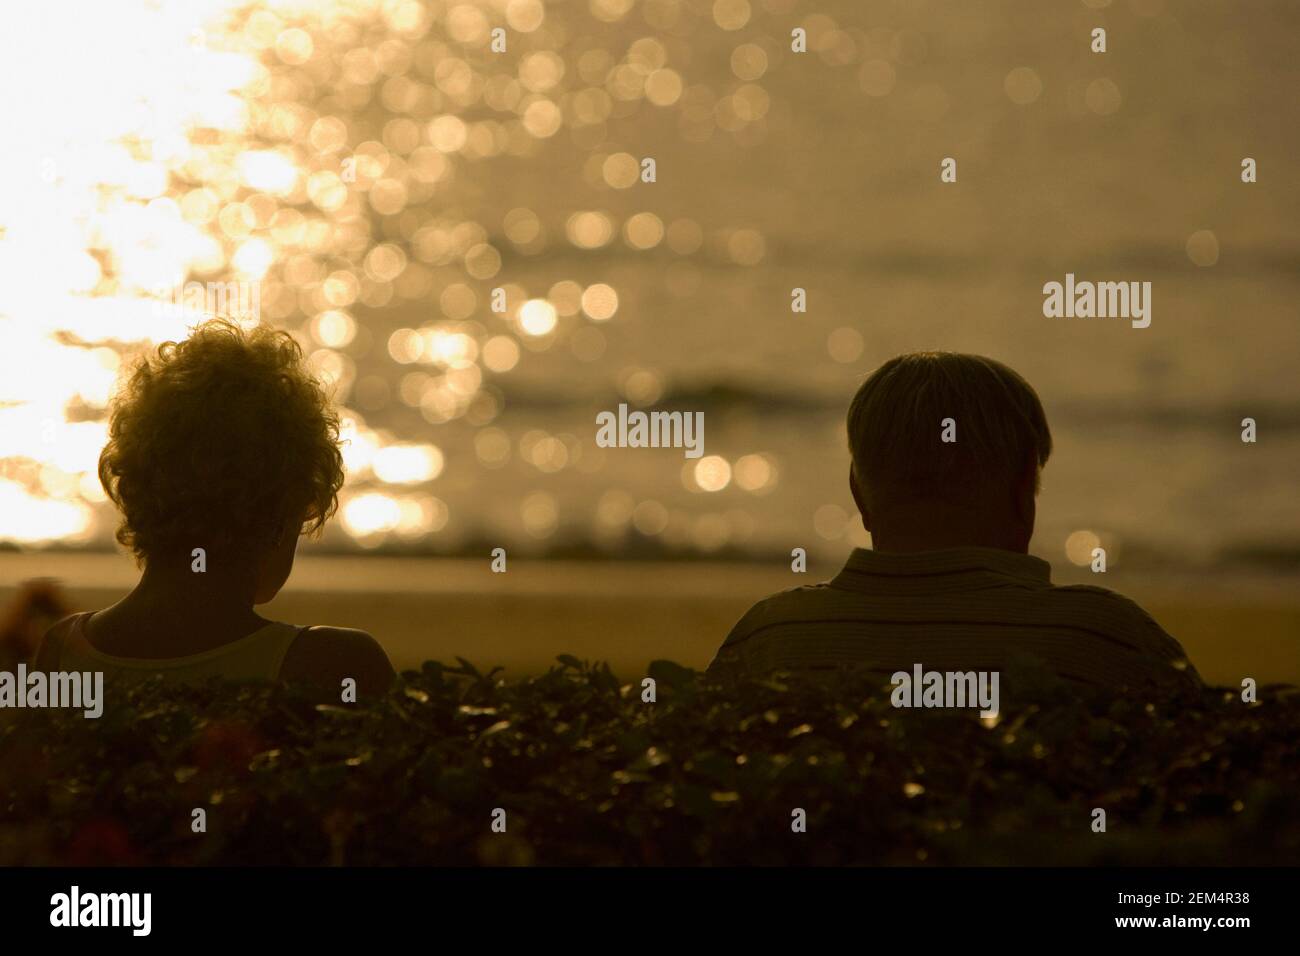 Silhouette of a man and a woman on the beach at dusk Stock Photo